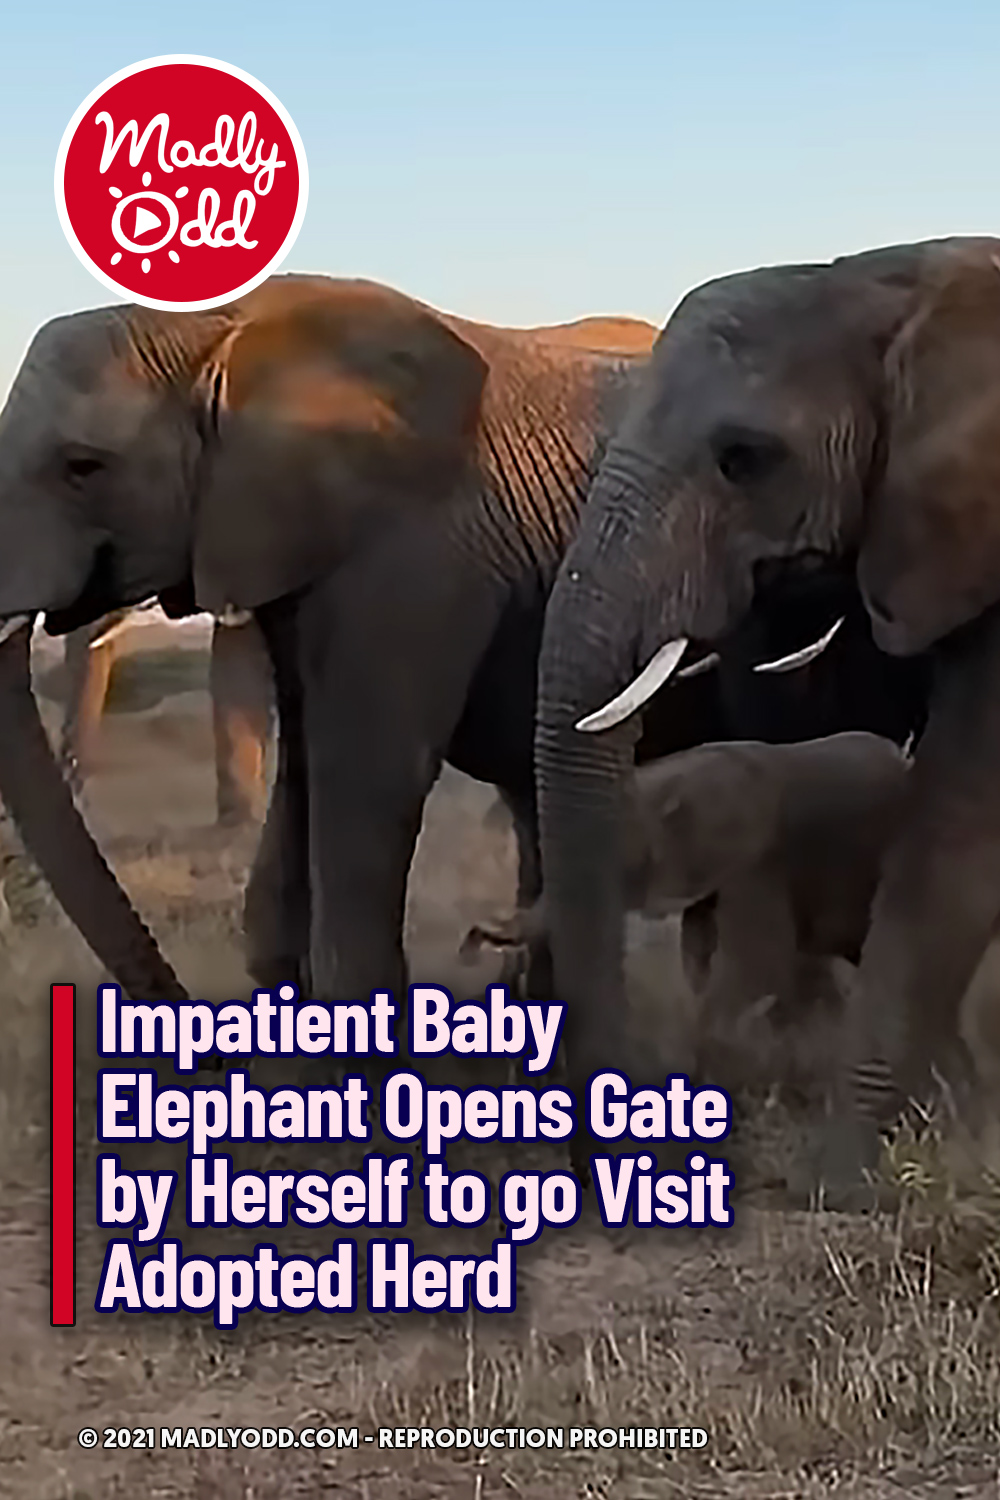 Impatient Baby Elephant Opens Gate by Herself to go Visit Adopted Herd